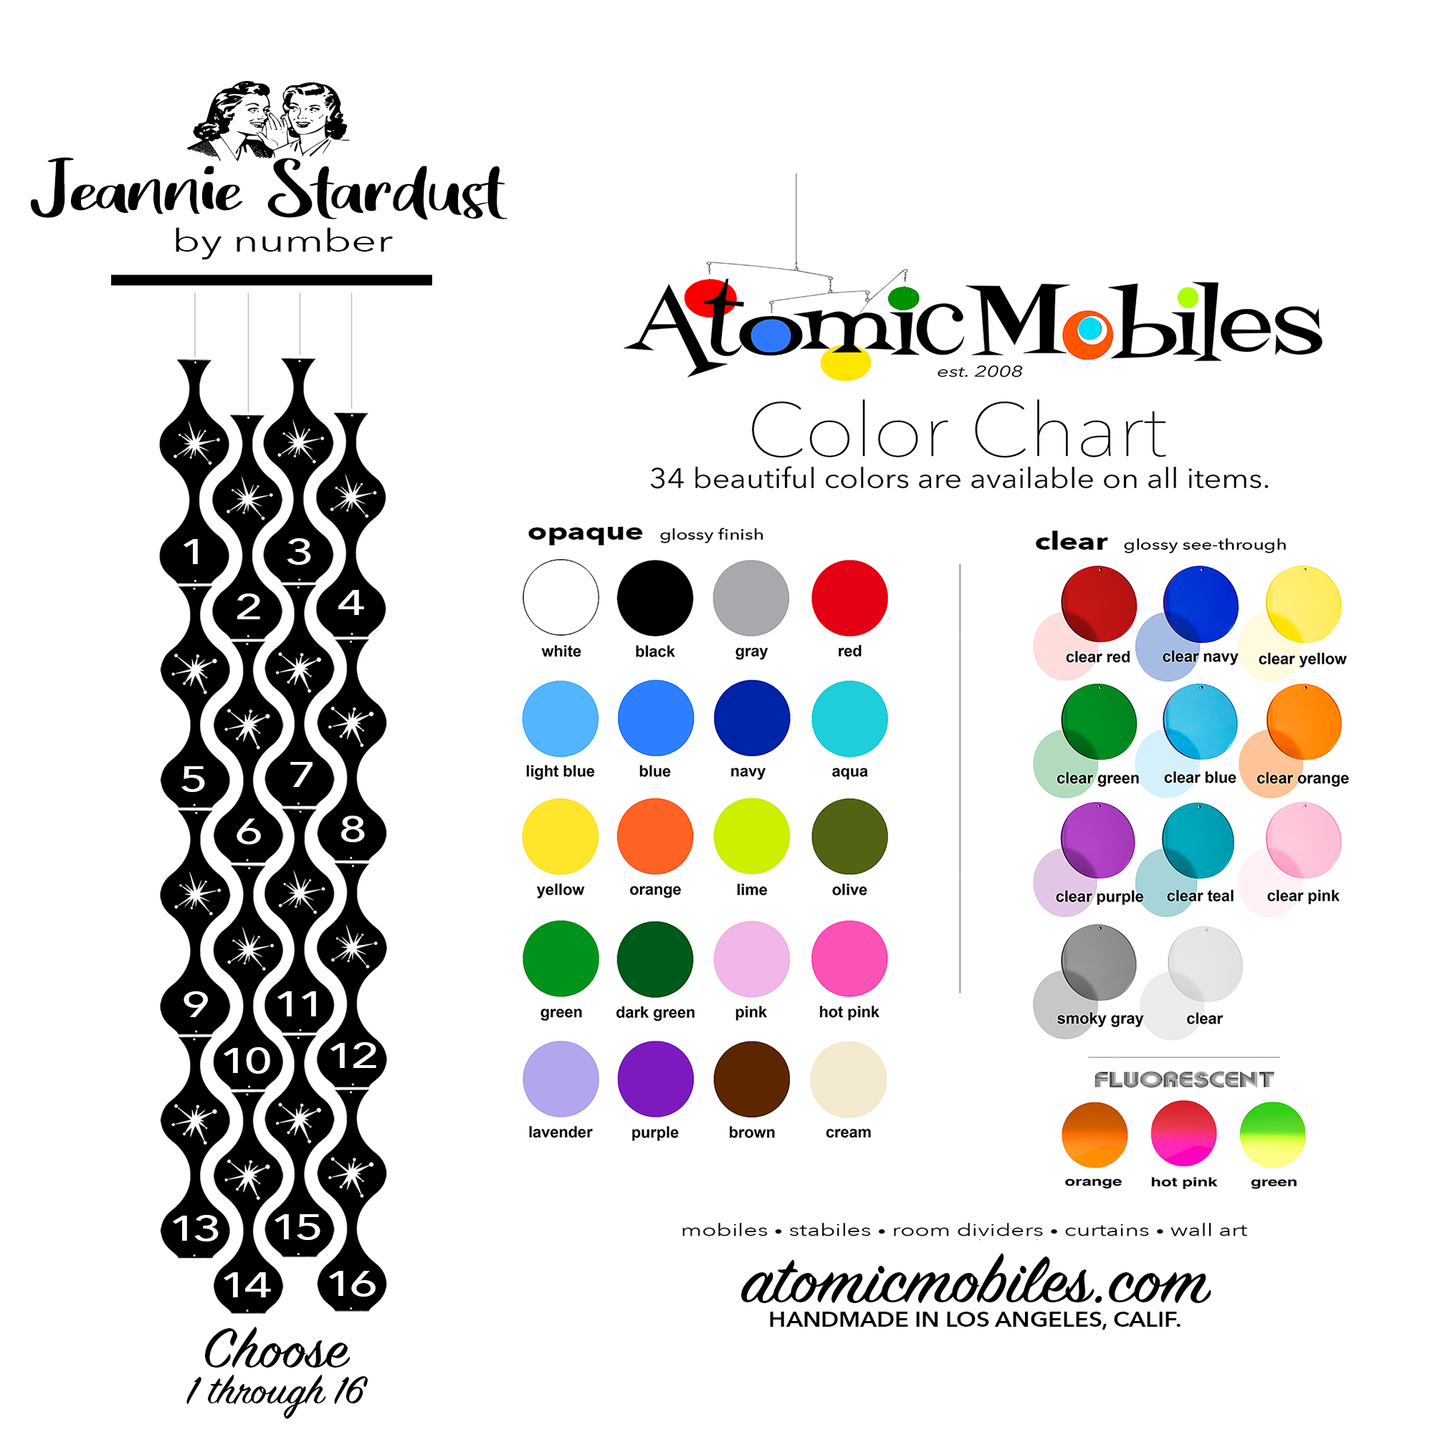 Color Chart for  Jeannie Stardust plexiglass acrylic hanging art mobiles in mid century modern style for home decor by AtomicMobiles.com